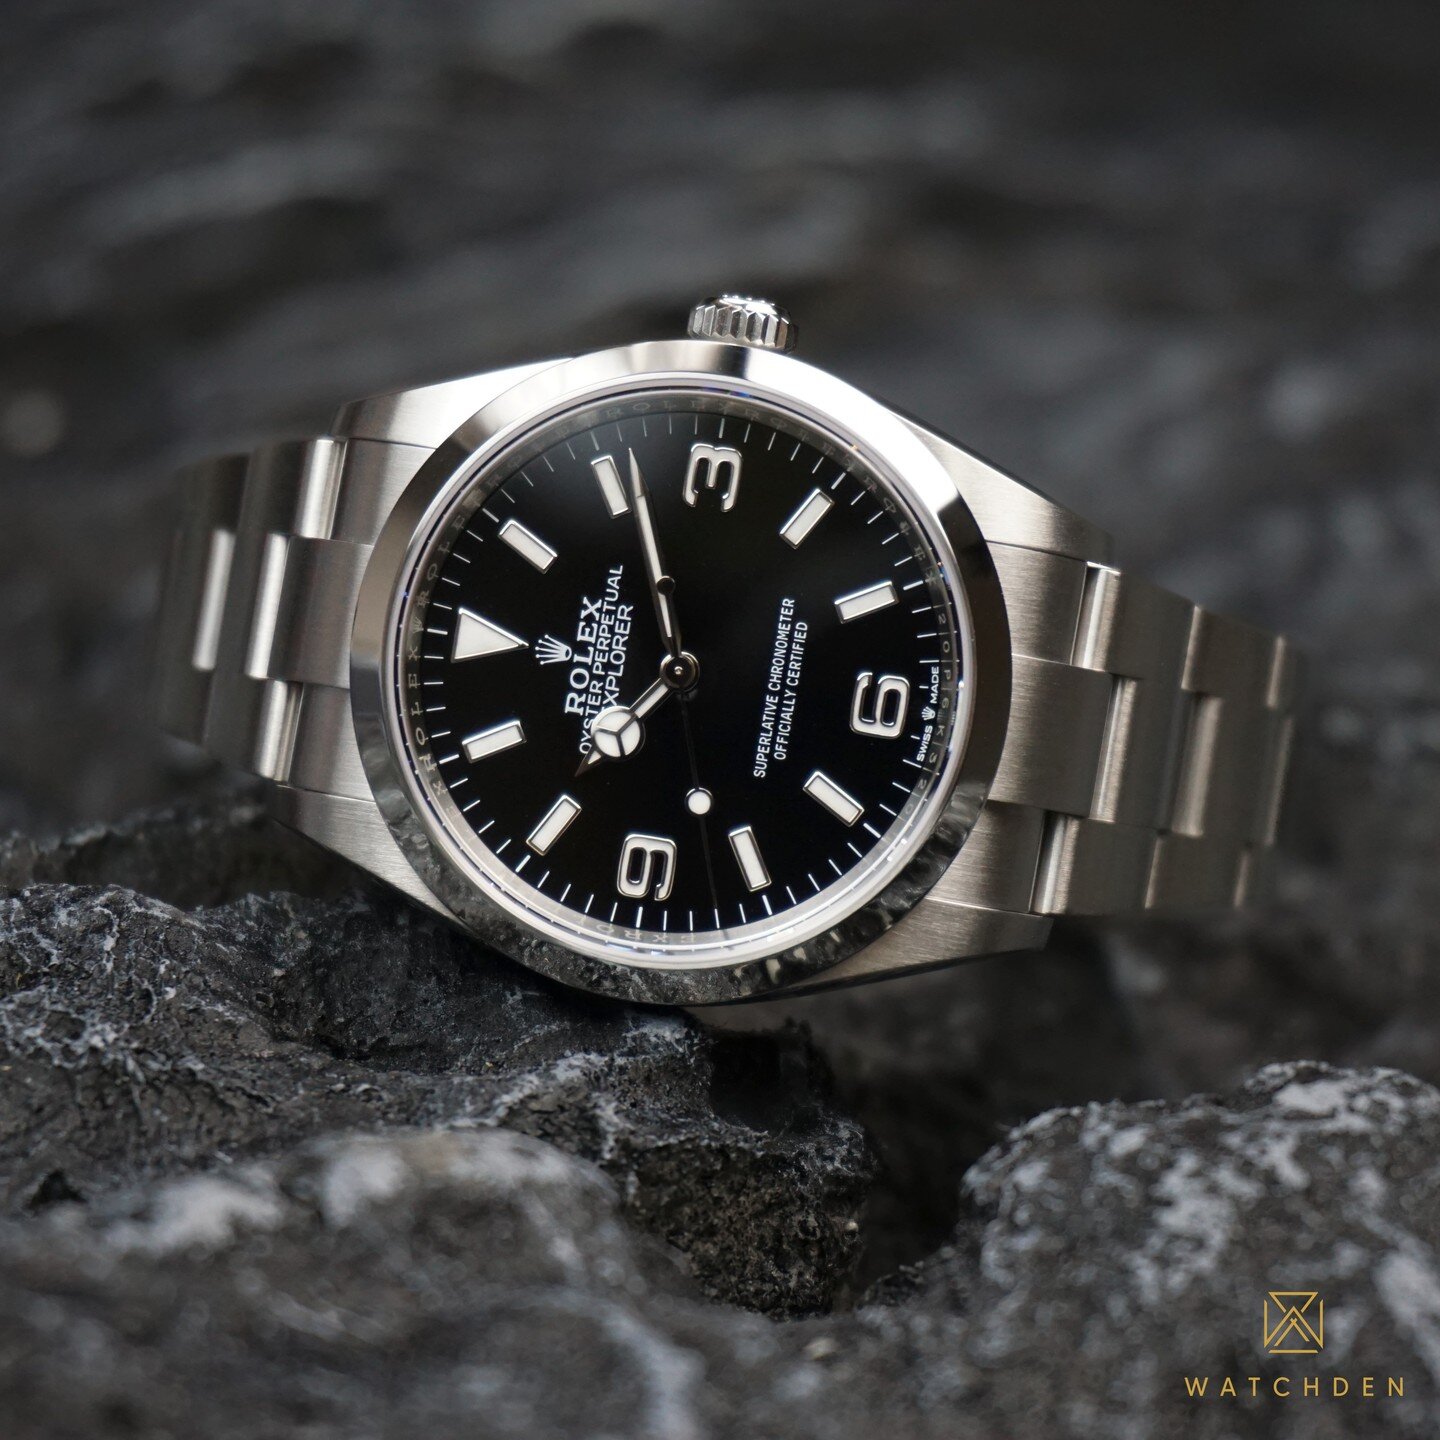 The Rolex Explorer was built to withstand the most extreme conditions. Today, the timepiece is loved by minimalists as well as people looking for the perfect daily wear. 

What do you think of the Rolex Explorer and do you think it is worth its curre